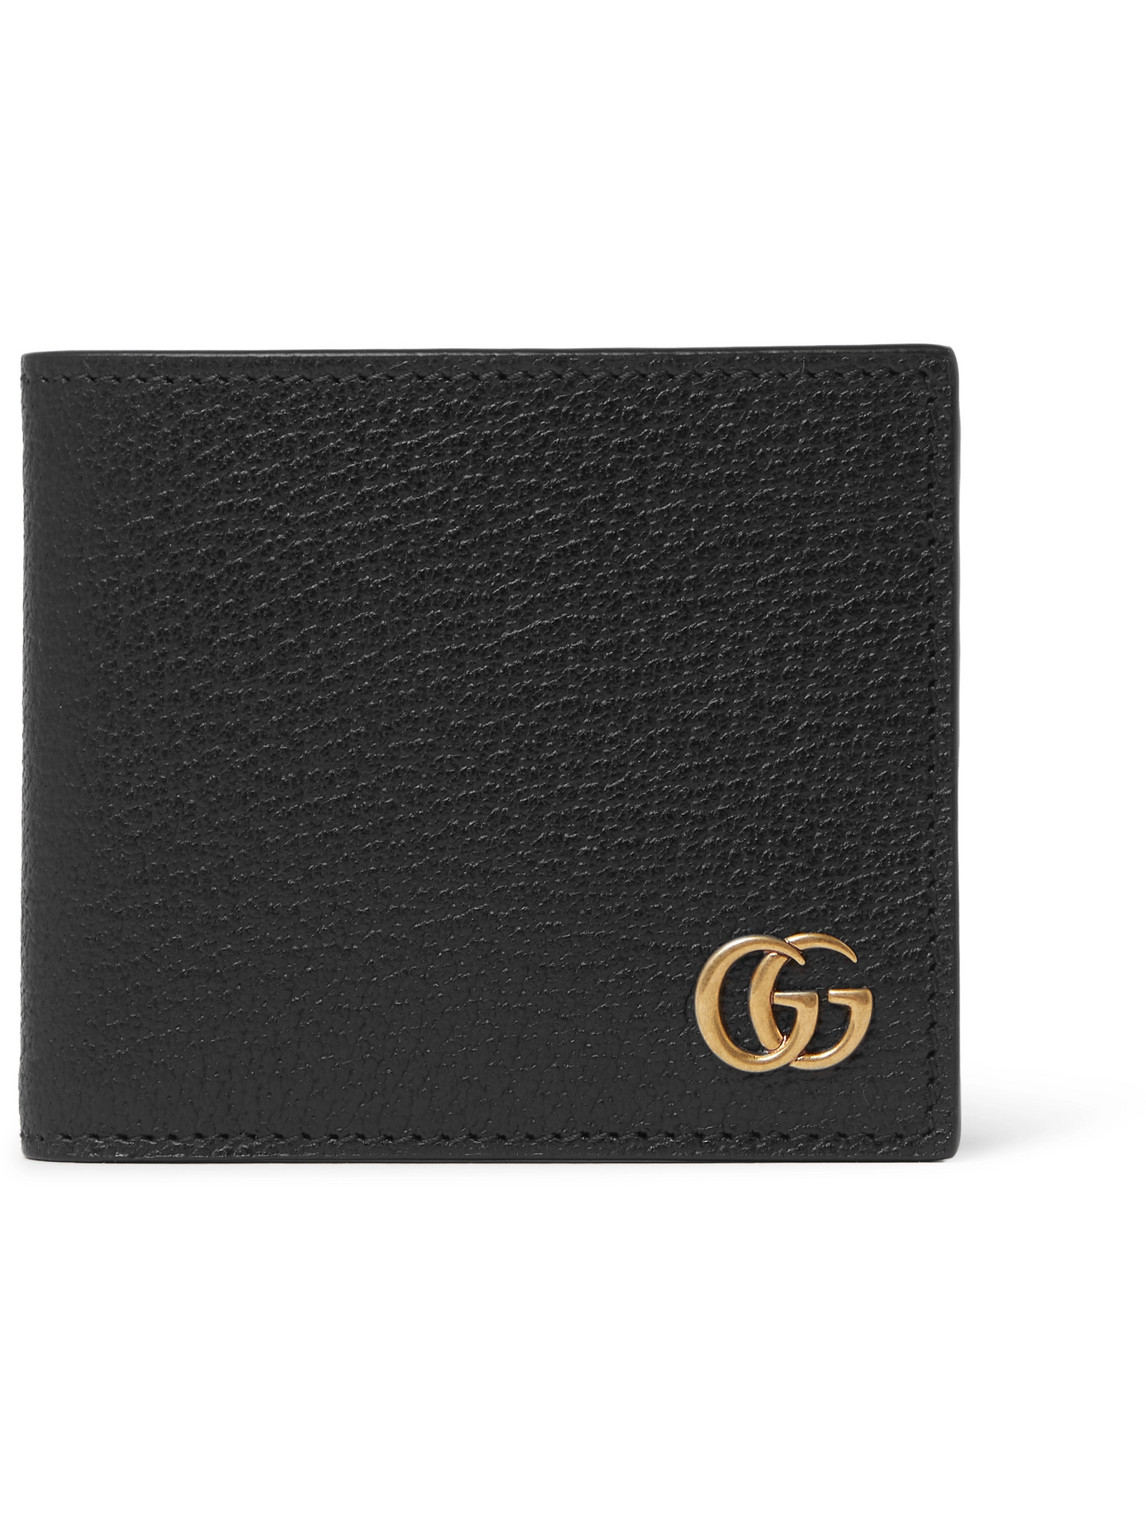 GUCCI GG Marmont Full-Grain Leather Billfold Wallet